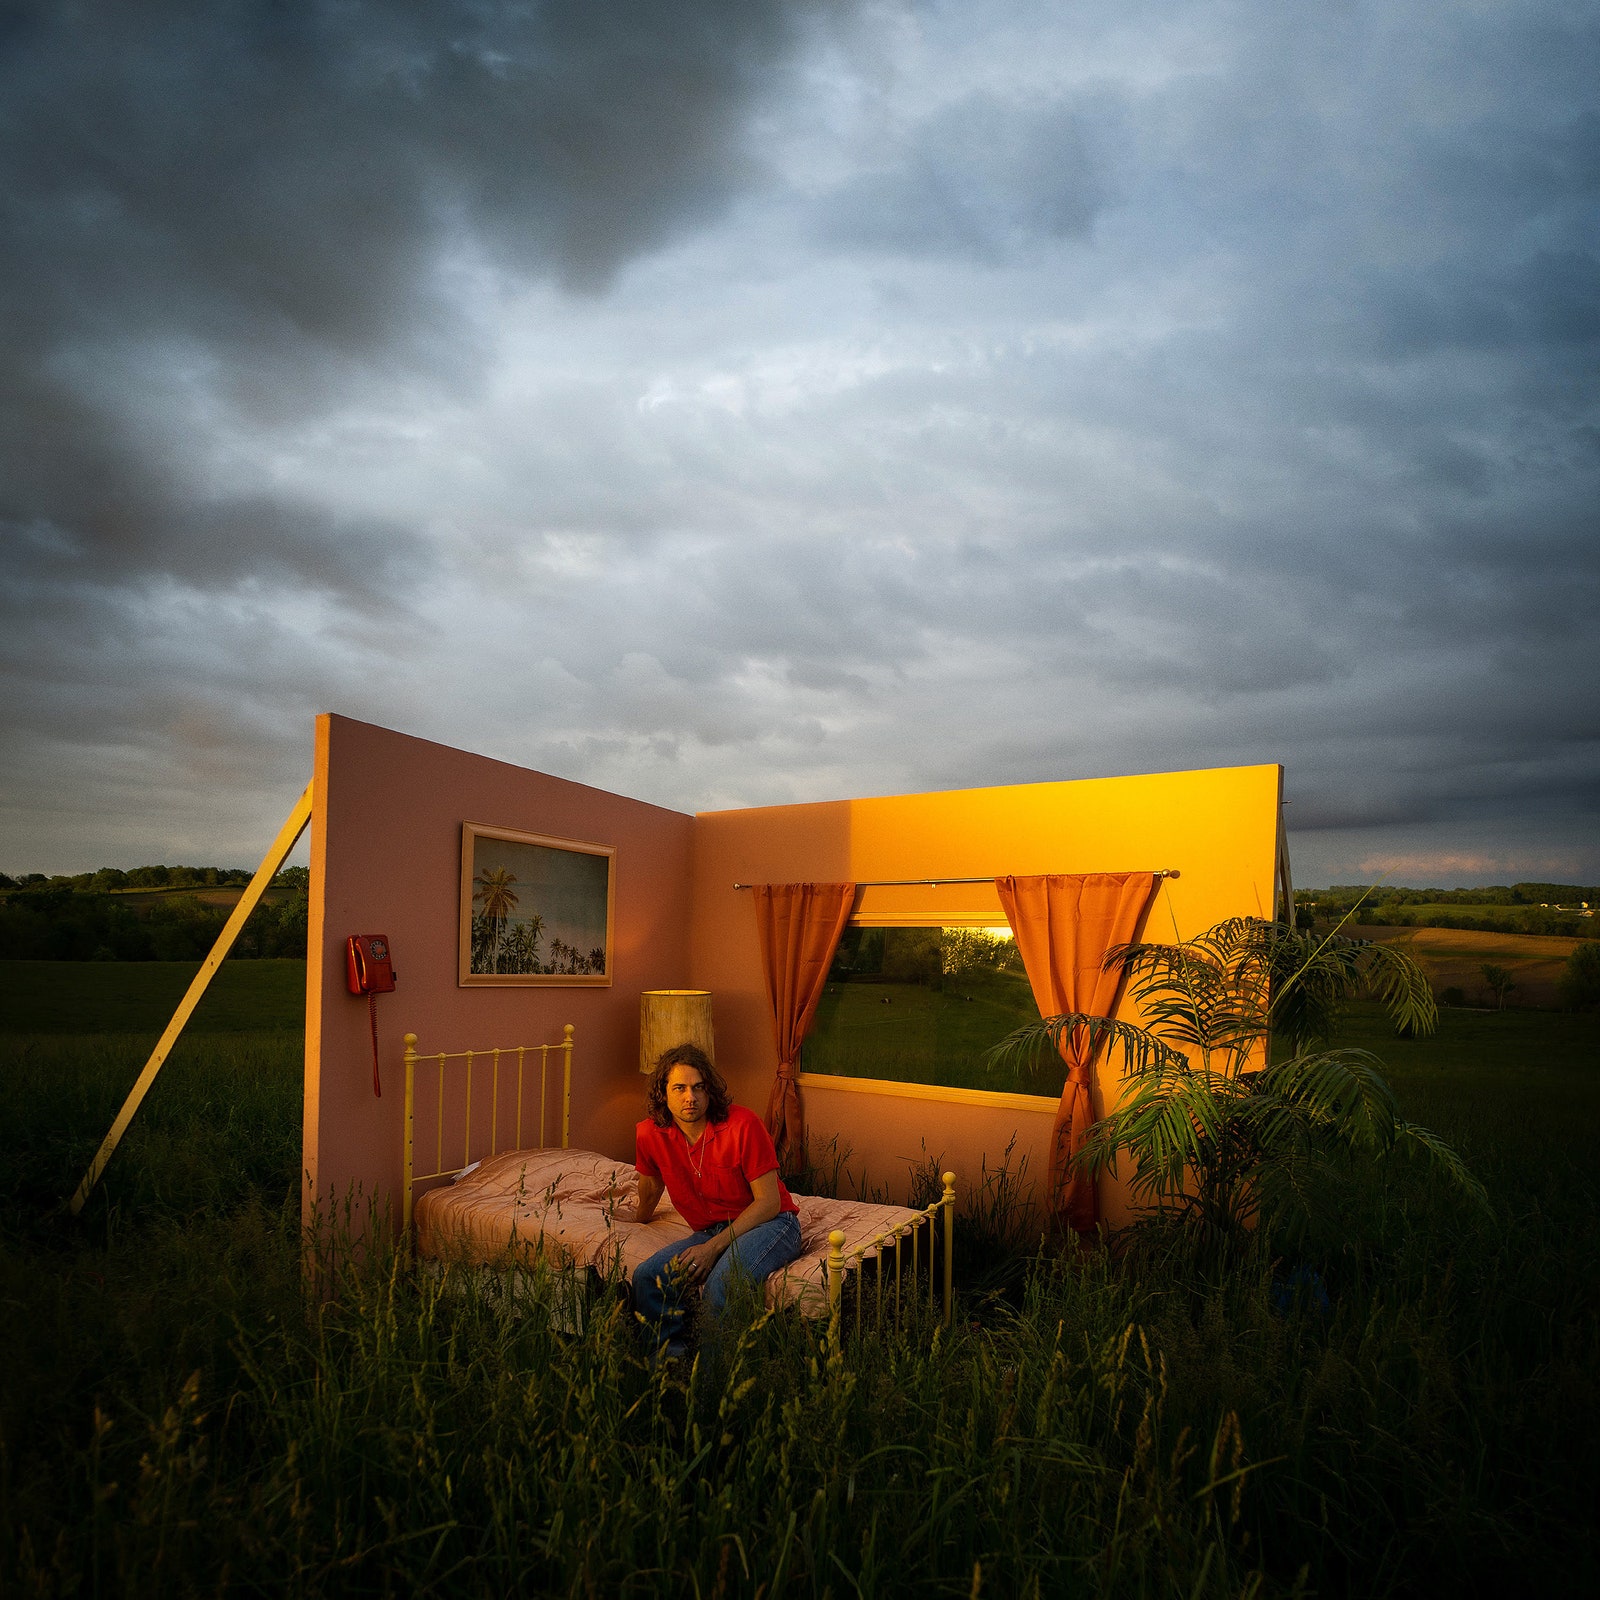 Image may contain Human Person Nature Outdoors Building Shelter Countryside Rural Tent and Camping